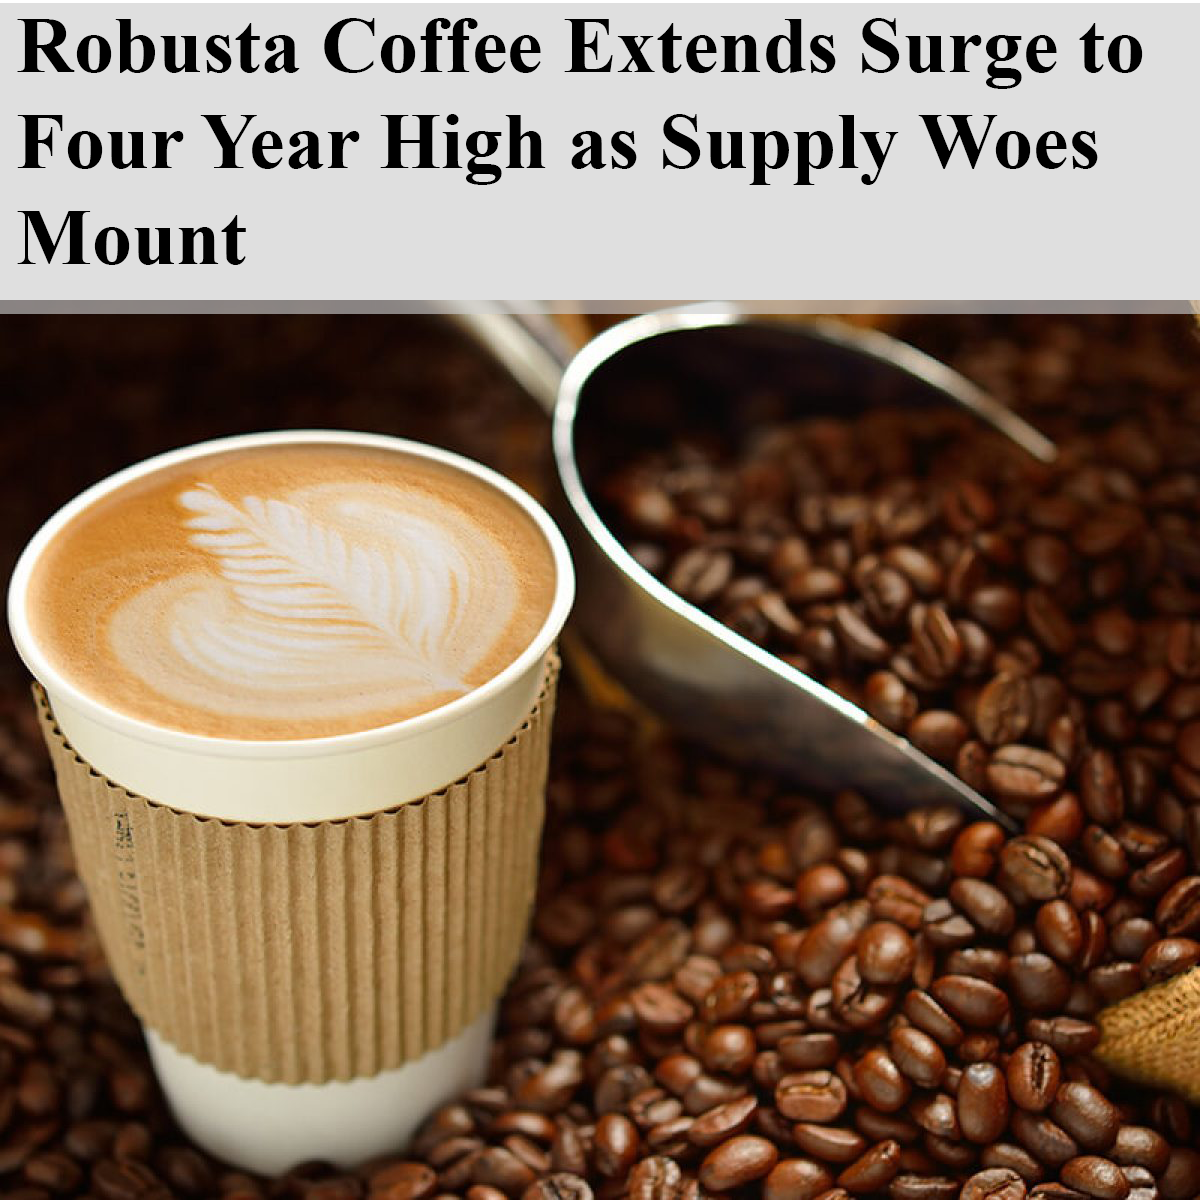 Robusta Coffee Extends Surge to Four Year High as Supply Woes Mount